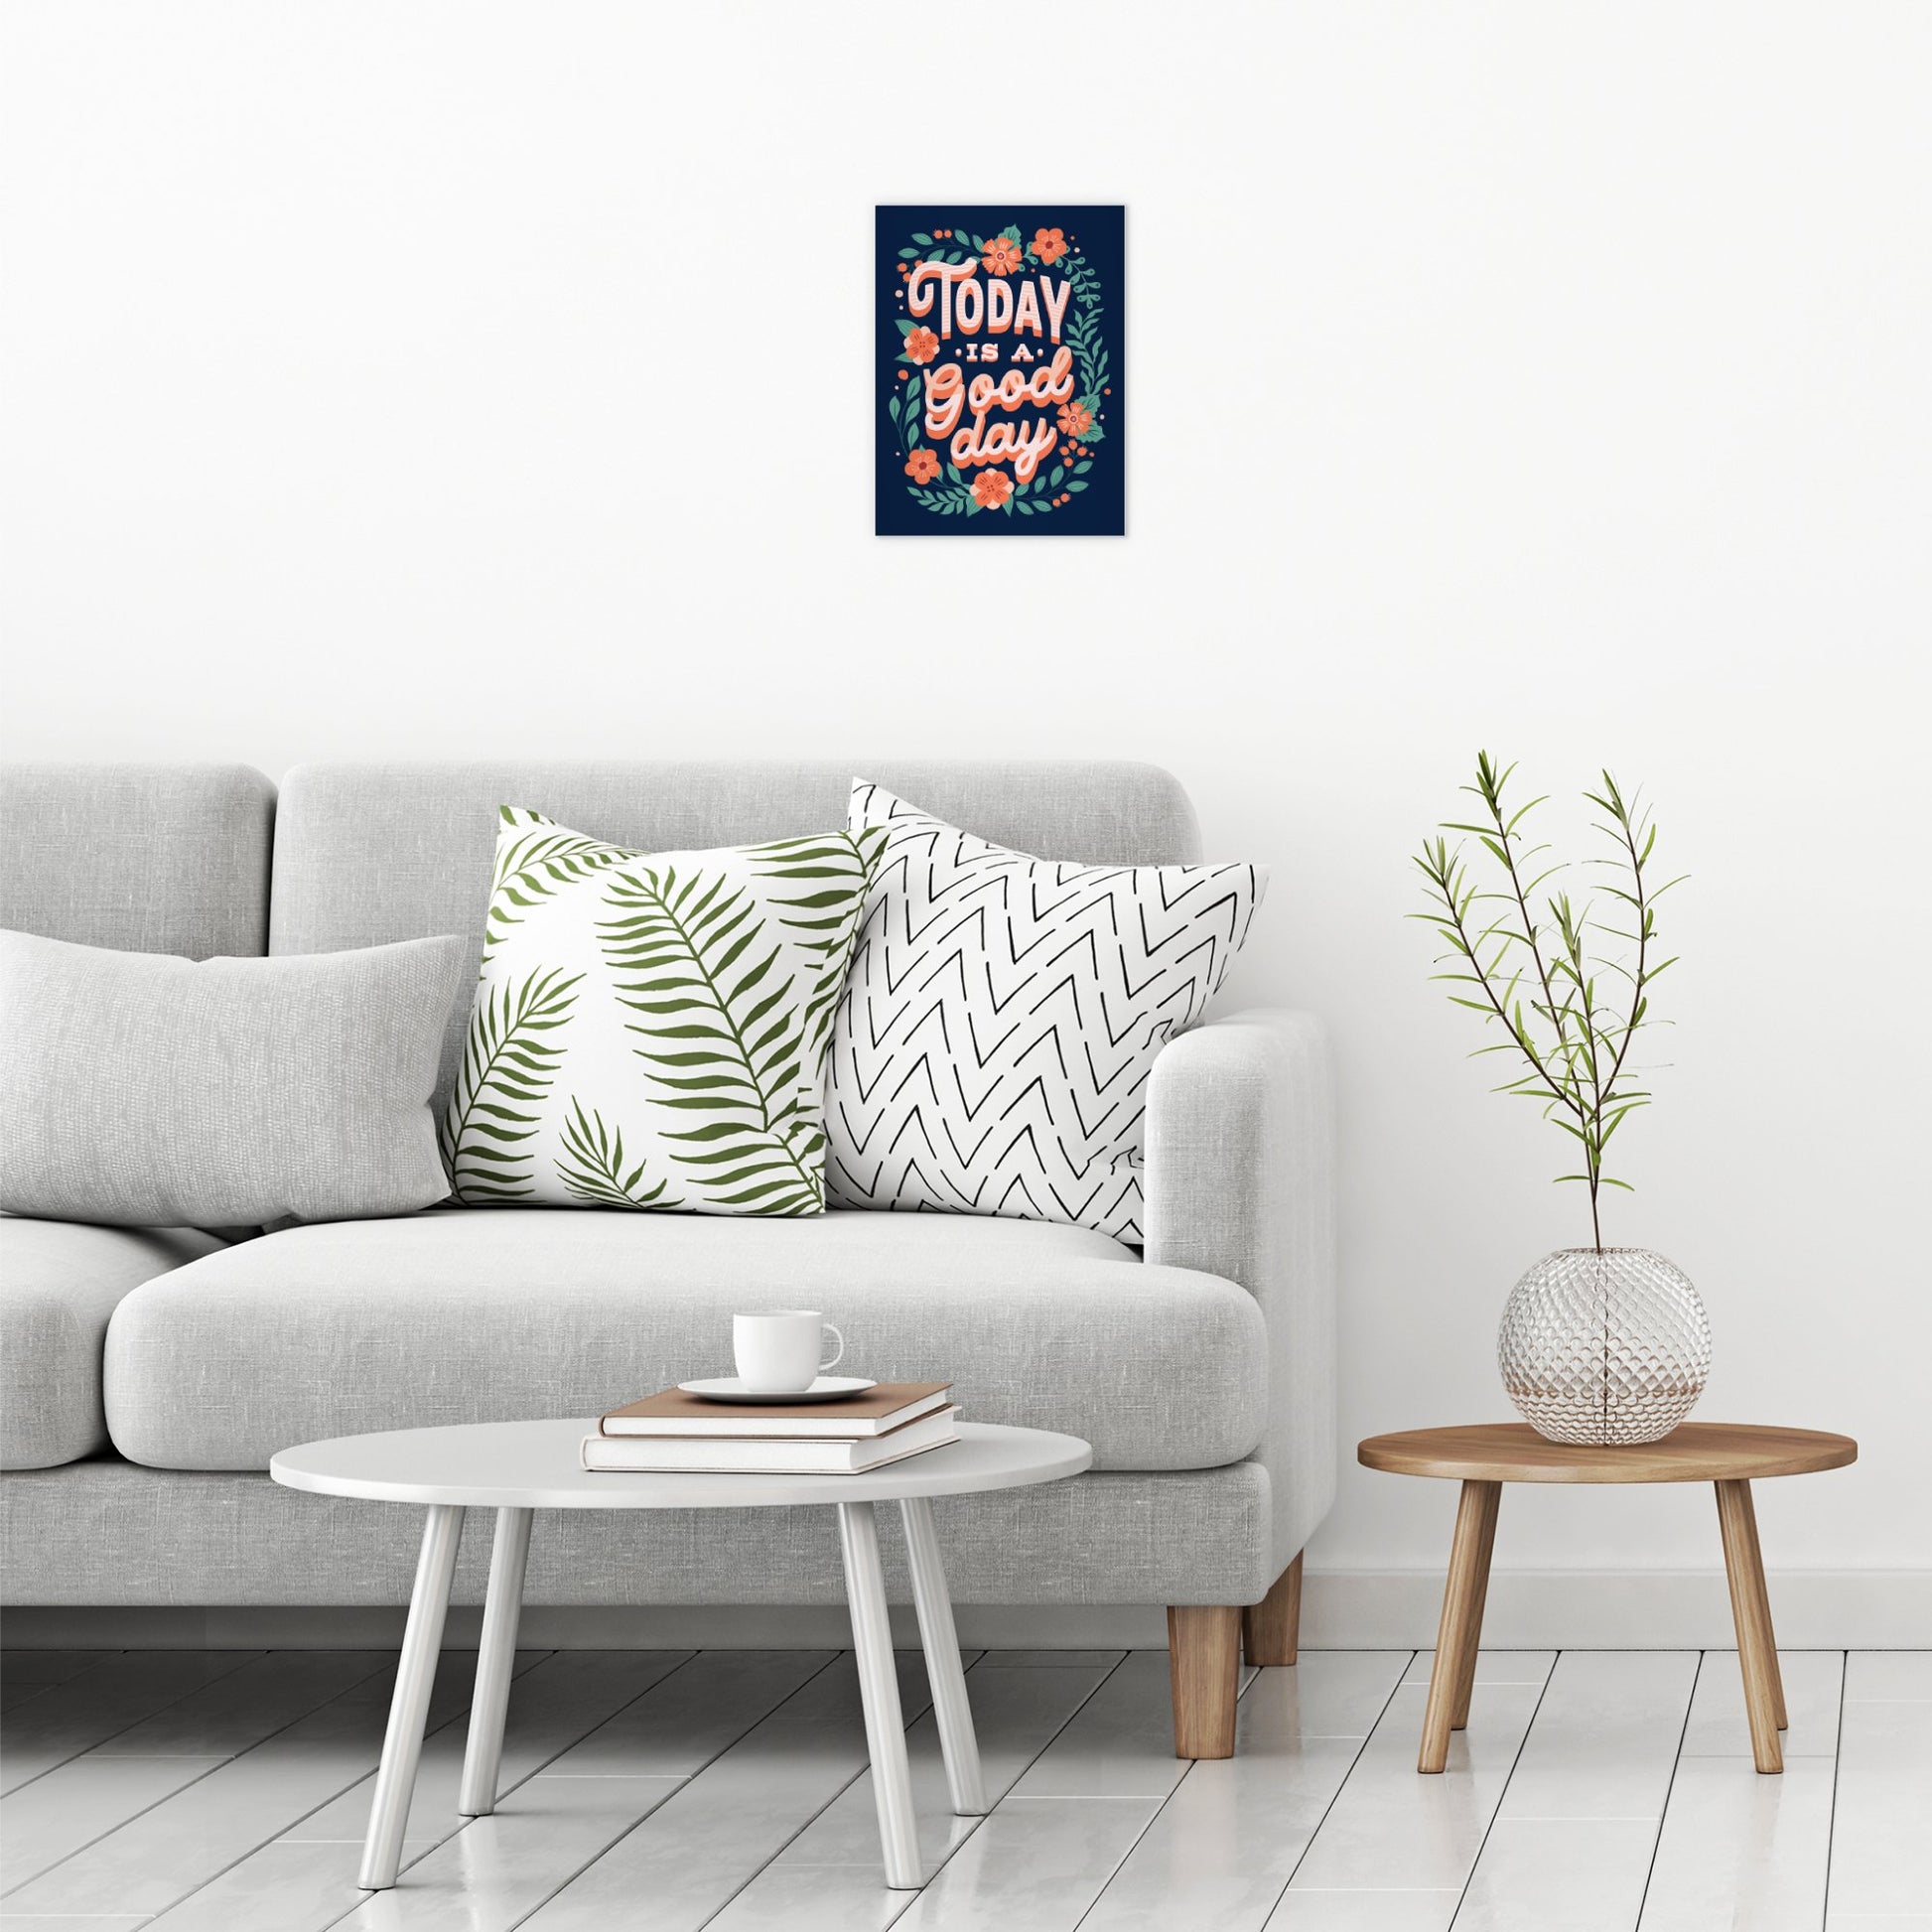 A contemporary modern room view showing a small size metal art poster display plate with printed design of a Today is a Good Day Inspirational Quote